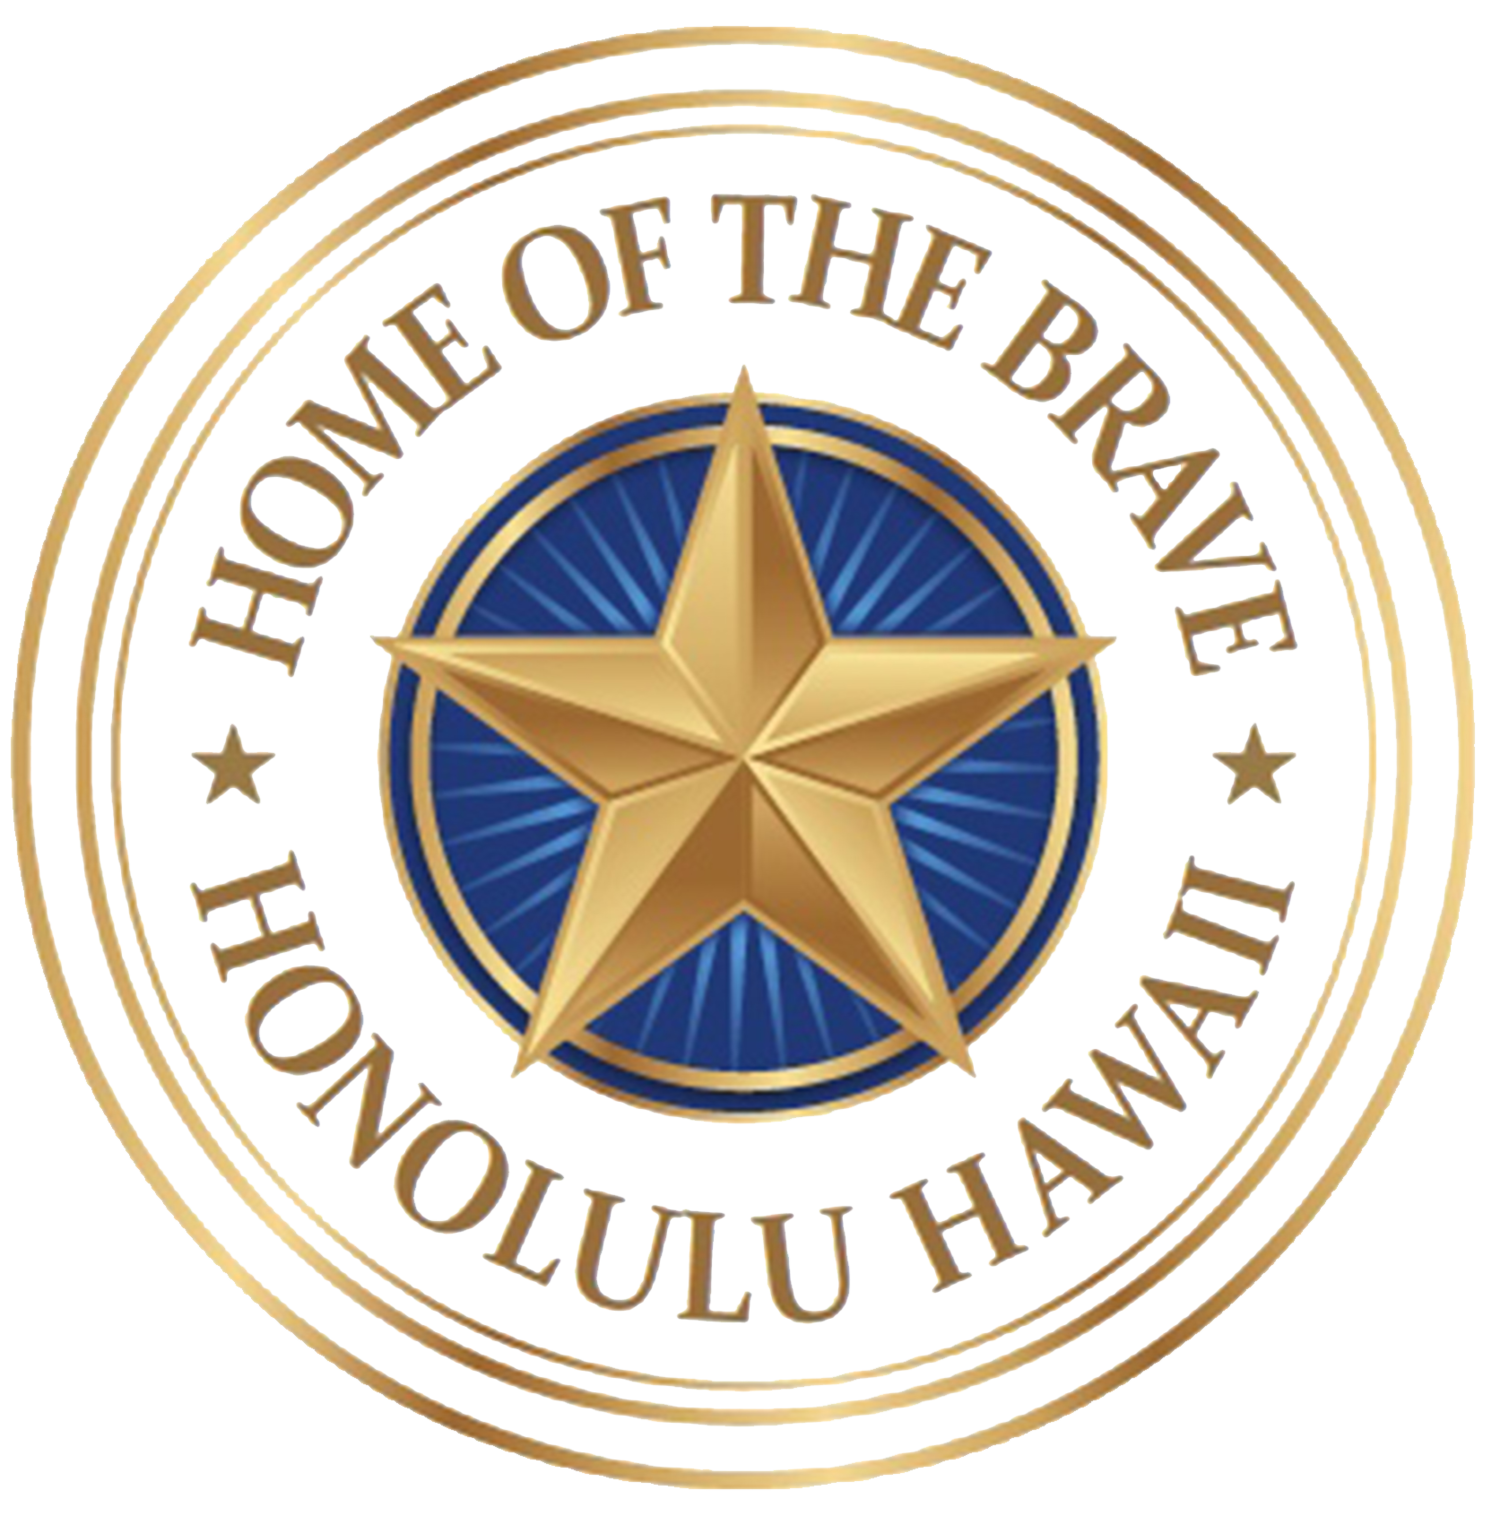 Home of the Brave Hawaii